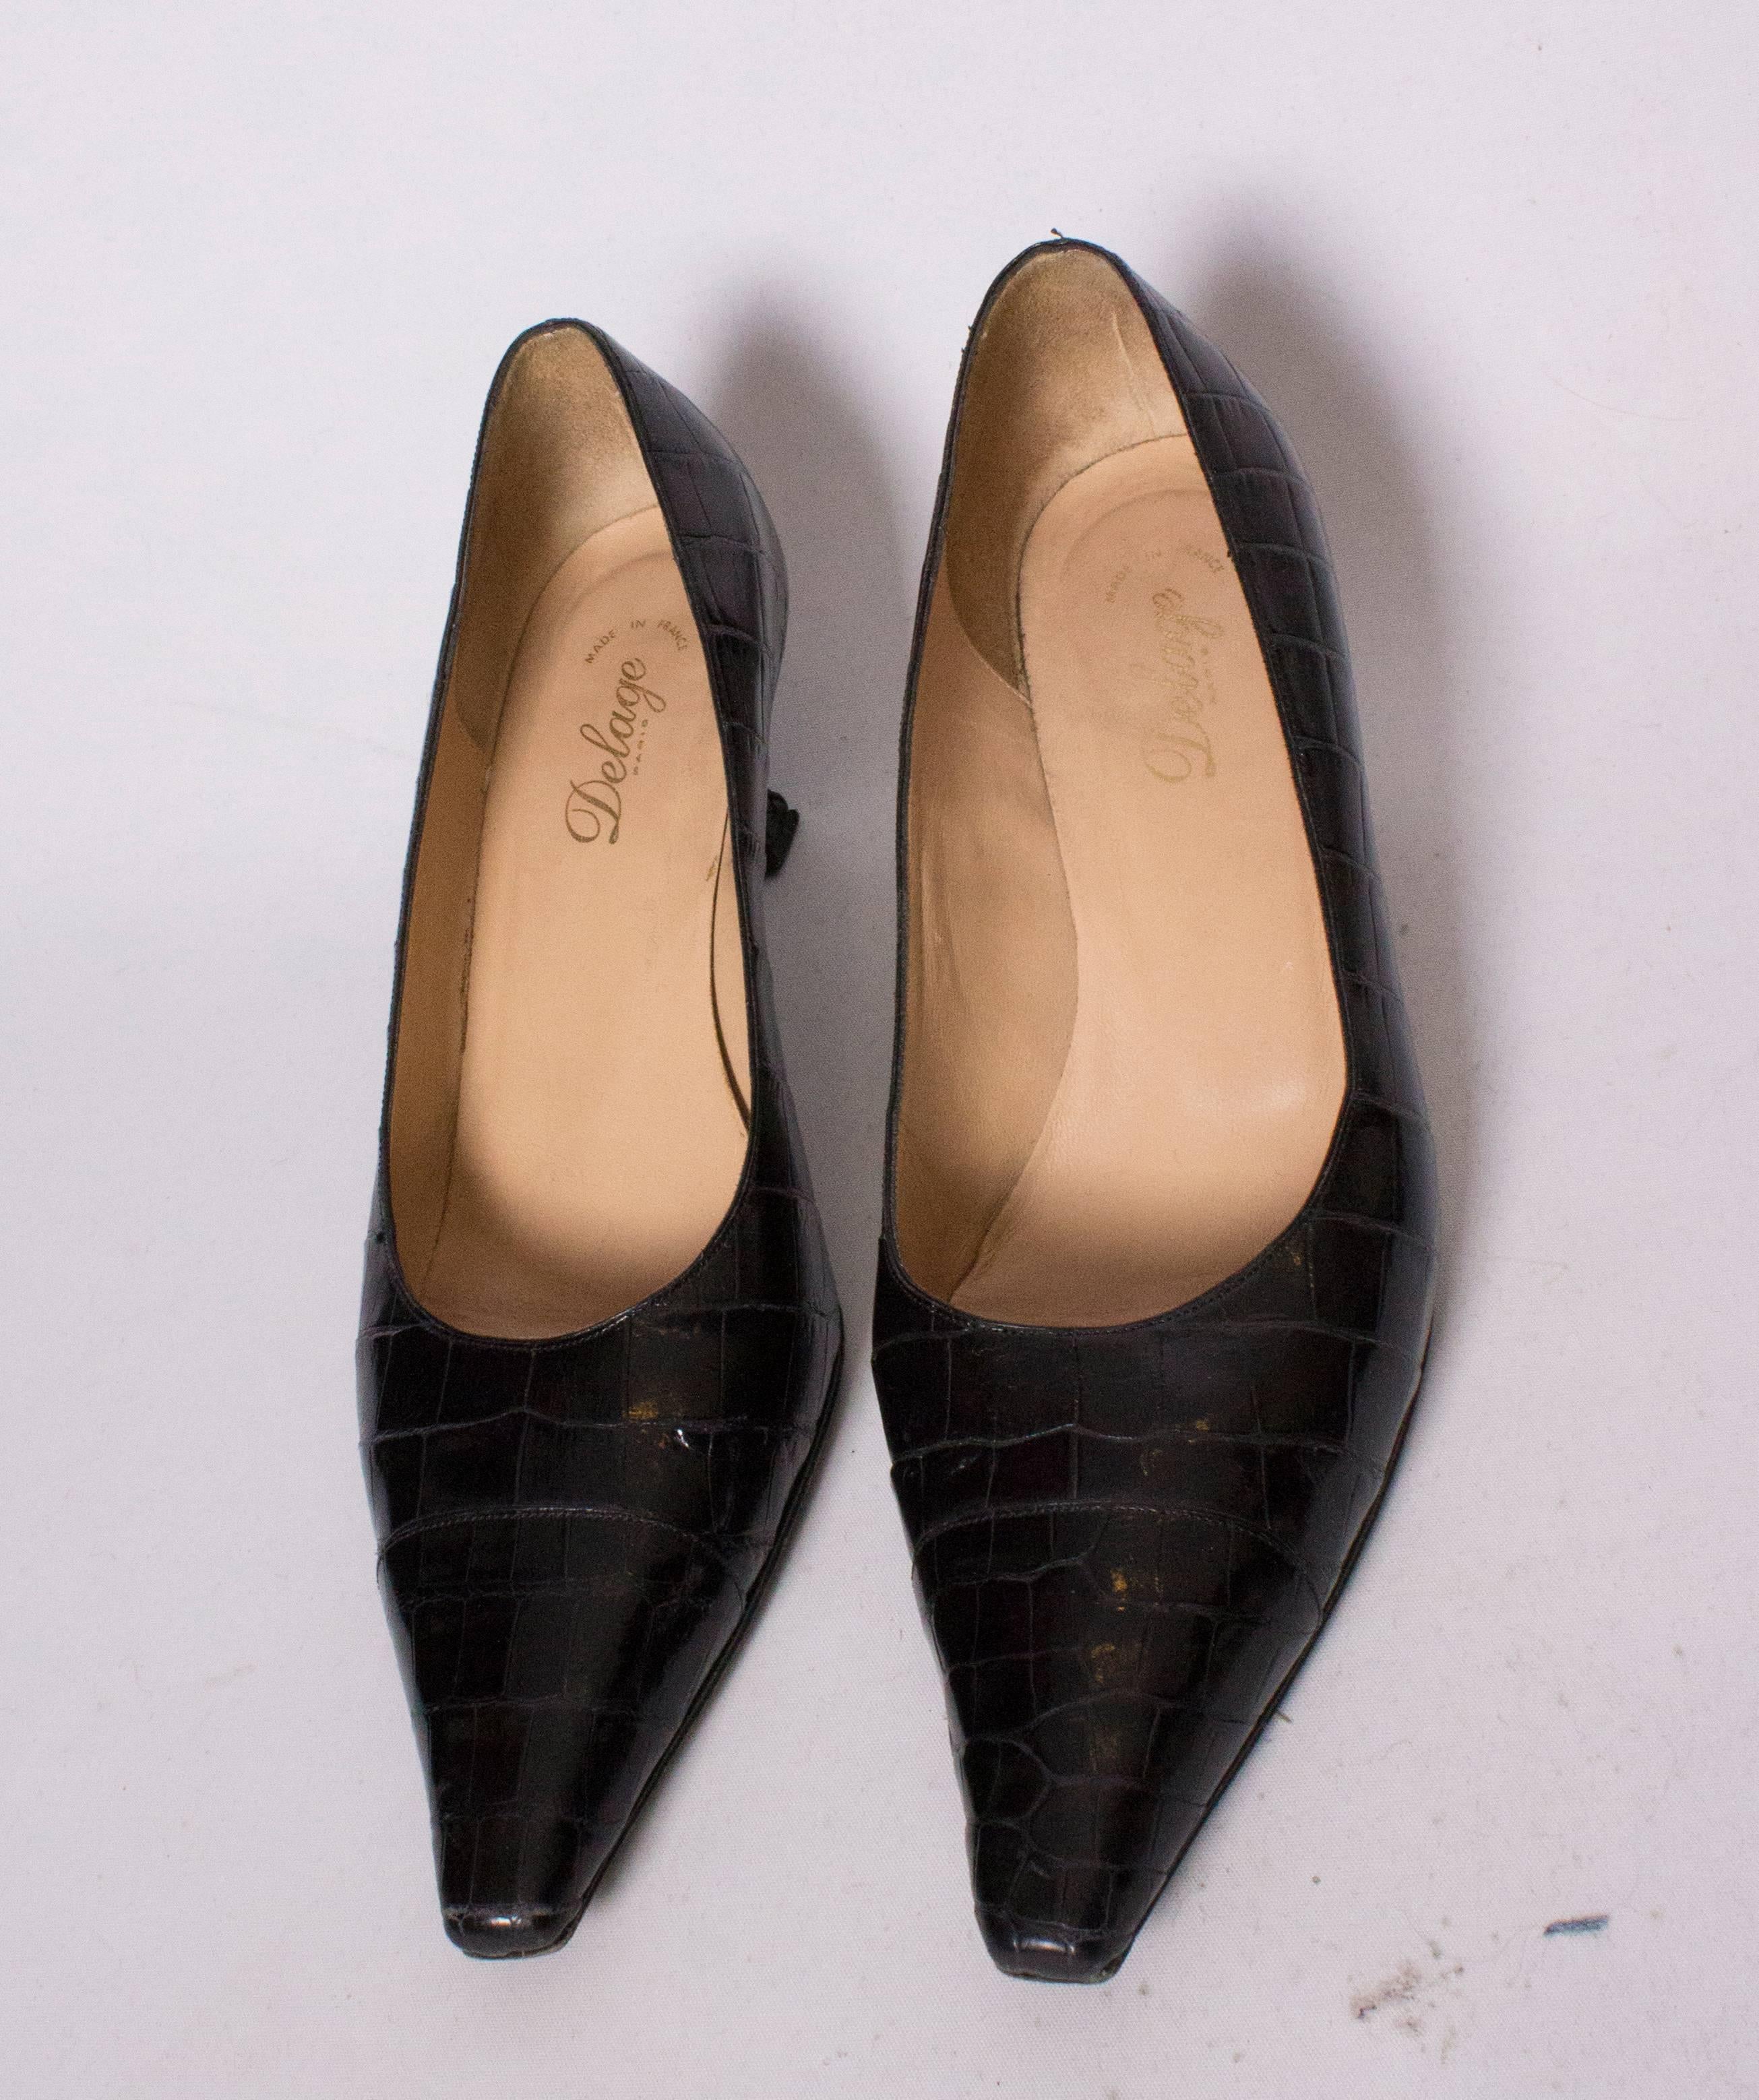 A chic pair of handmade shoes by Delage Paris. In black croc, they are in immaculate condition.